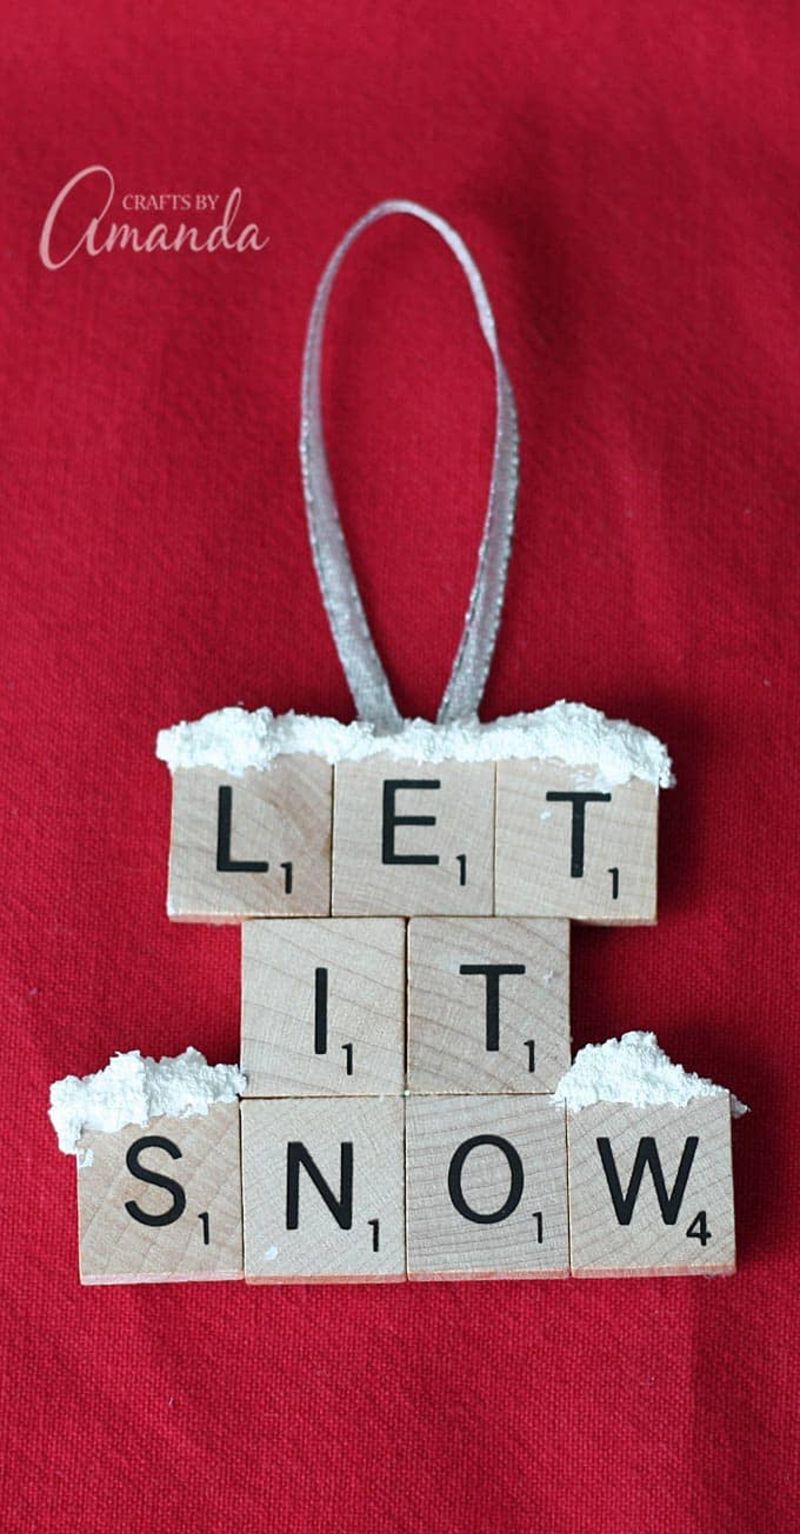 let-it-snow-scrabble-tile-ornament | easy christmas crafts to make and sell for profit